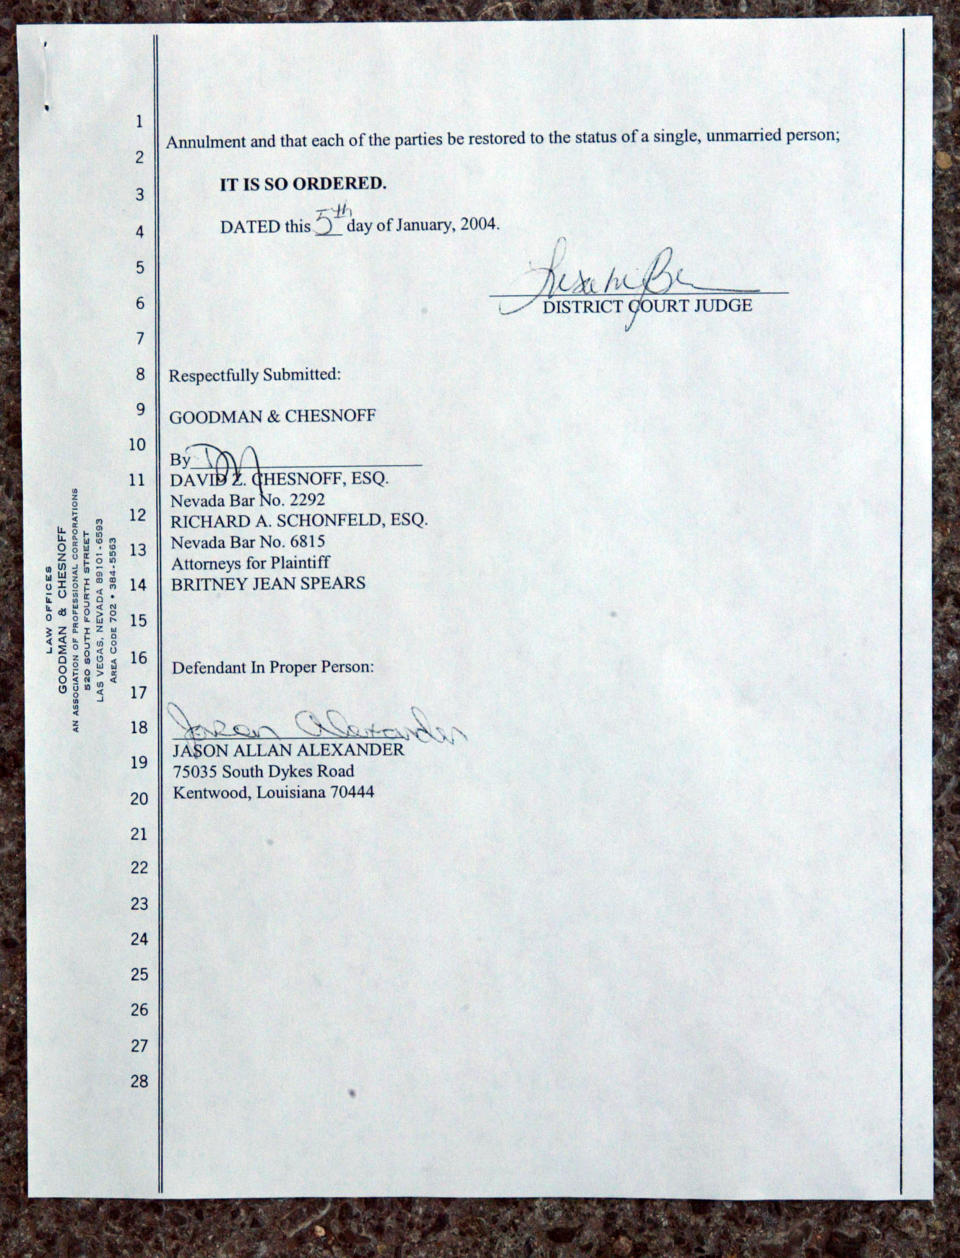 LAS VEGAS, NV - JANUARY 5:  A copy of the affidavit for annulment of marriage for recording artist/bride Britney Spears and groom Jason Allen Alexander on file at the Family Courts Service Building January 5, 2004 in Las Vegas, Nevada.  The wedding ceremony was performed on January 3, 2004.  (Photo by Frederick M. Brown/Getty Images)